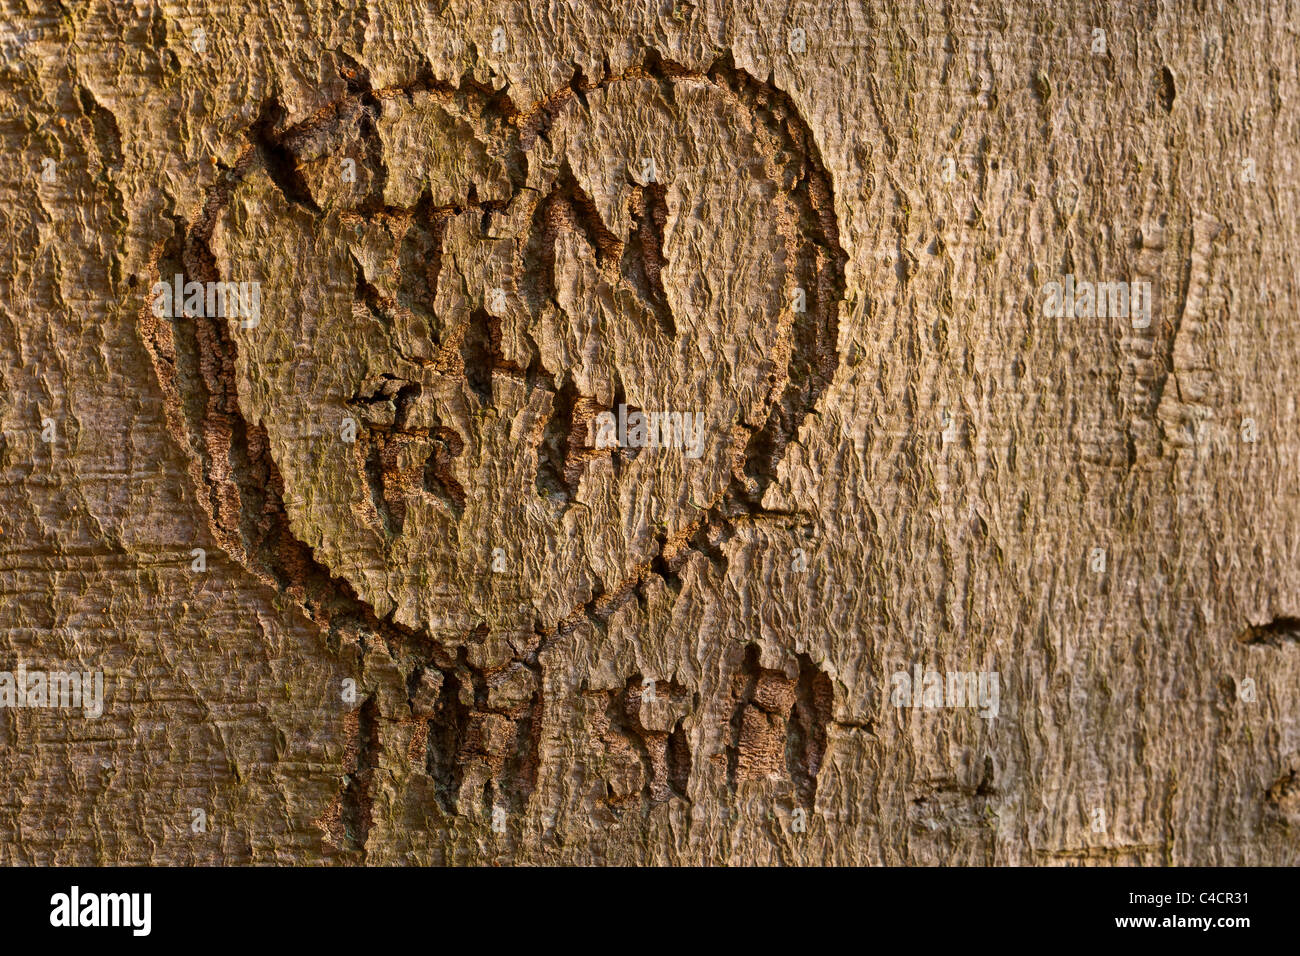 Love heart and initials carved into the bark of a beech tree Stock Photo